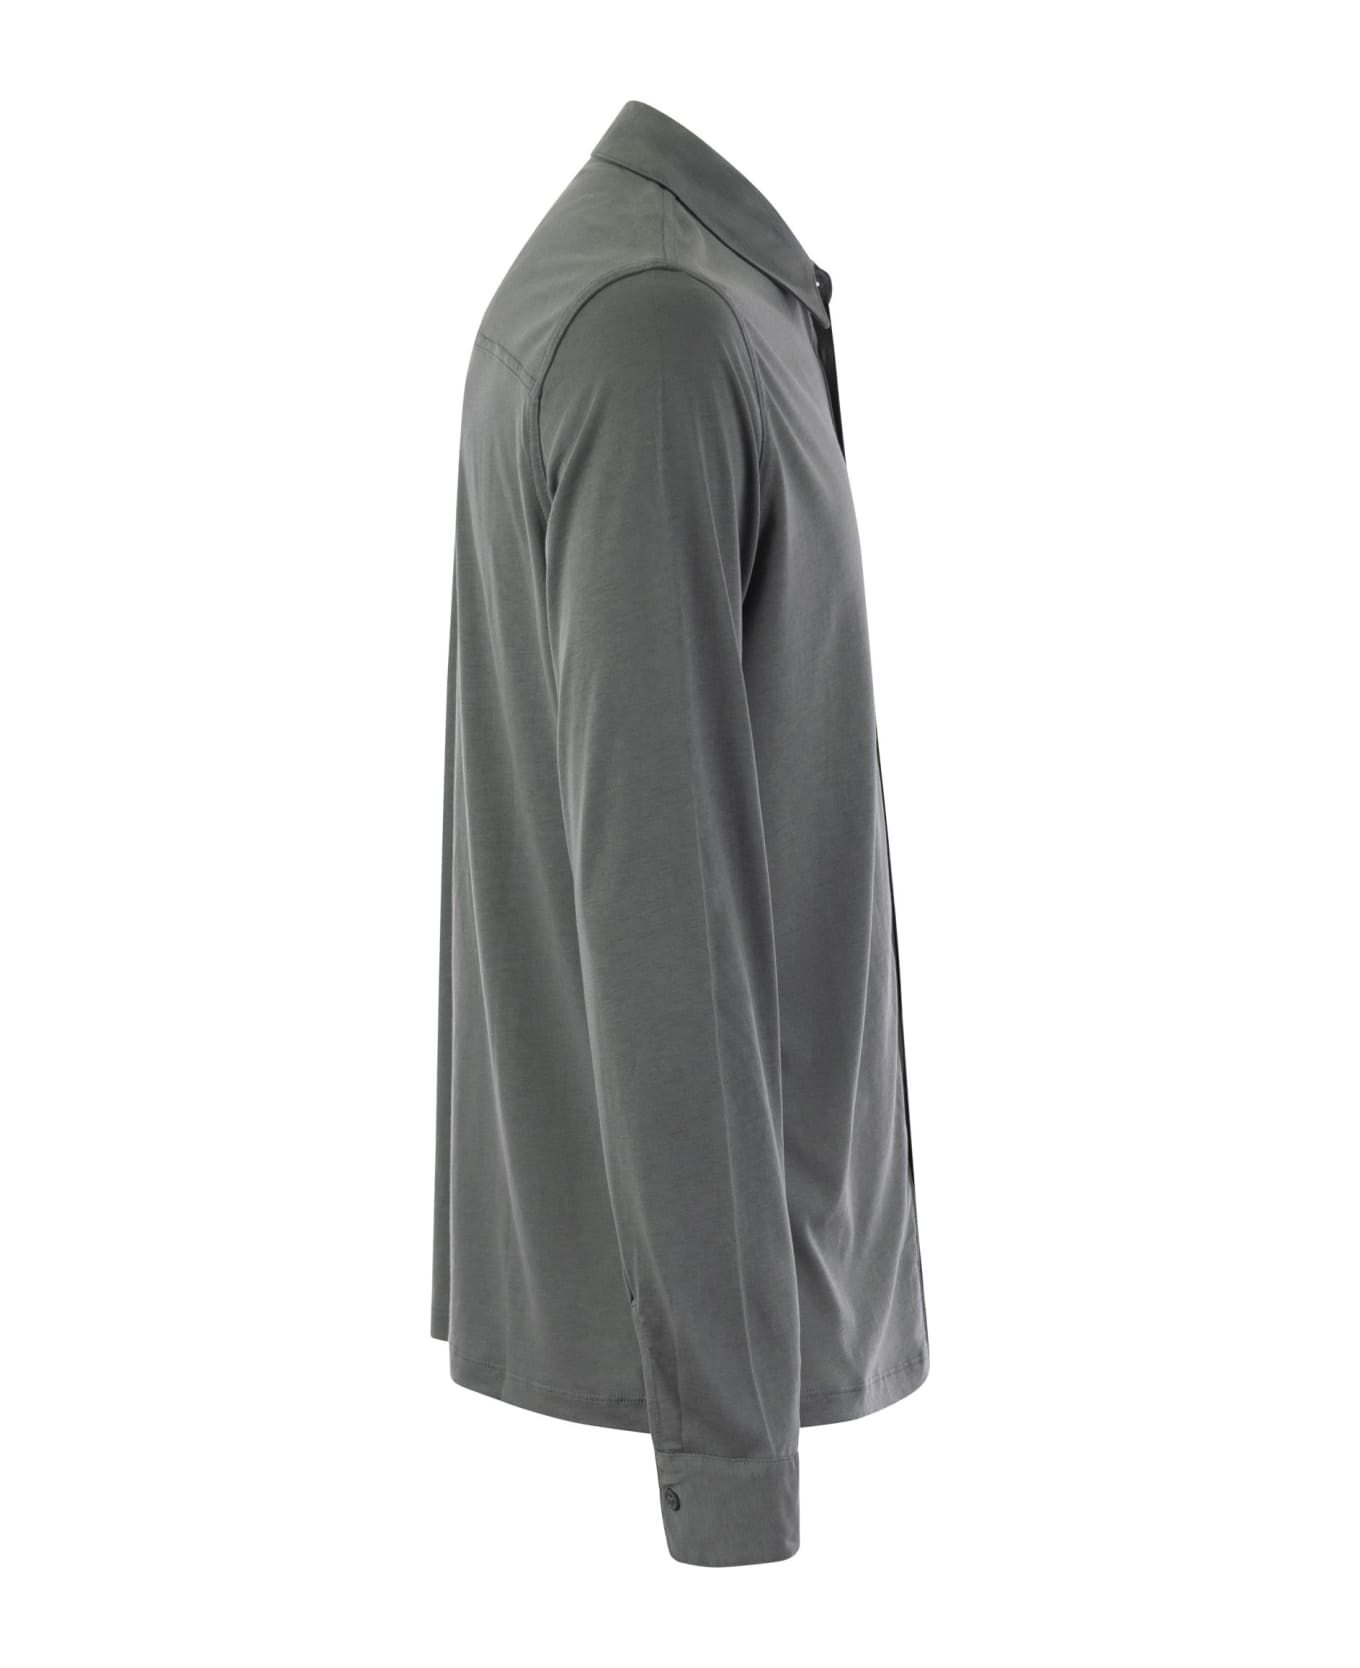 Majestic Filatures Long-sleeved Shirt In Lyocell And Cotton - Grey